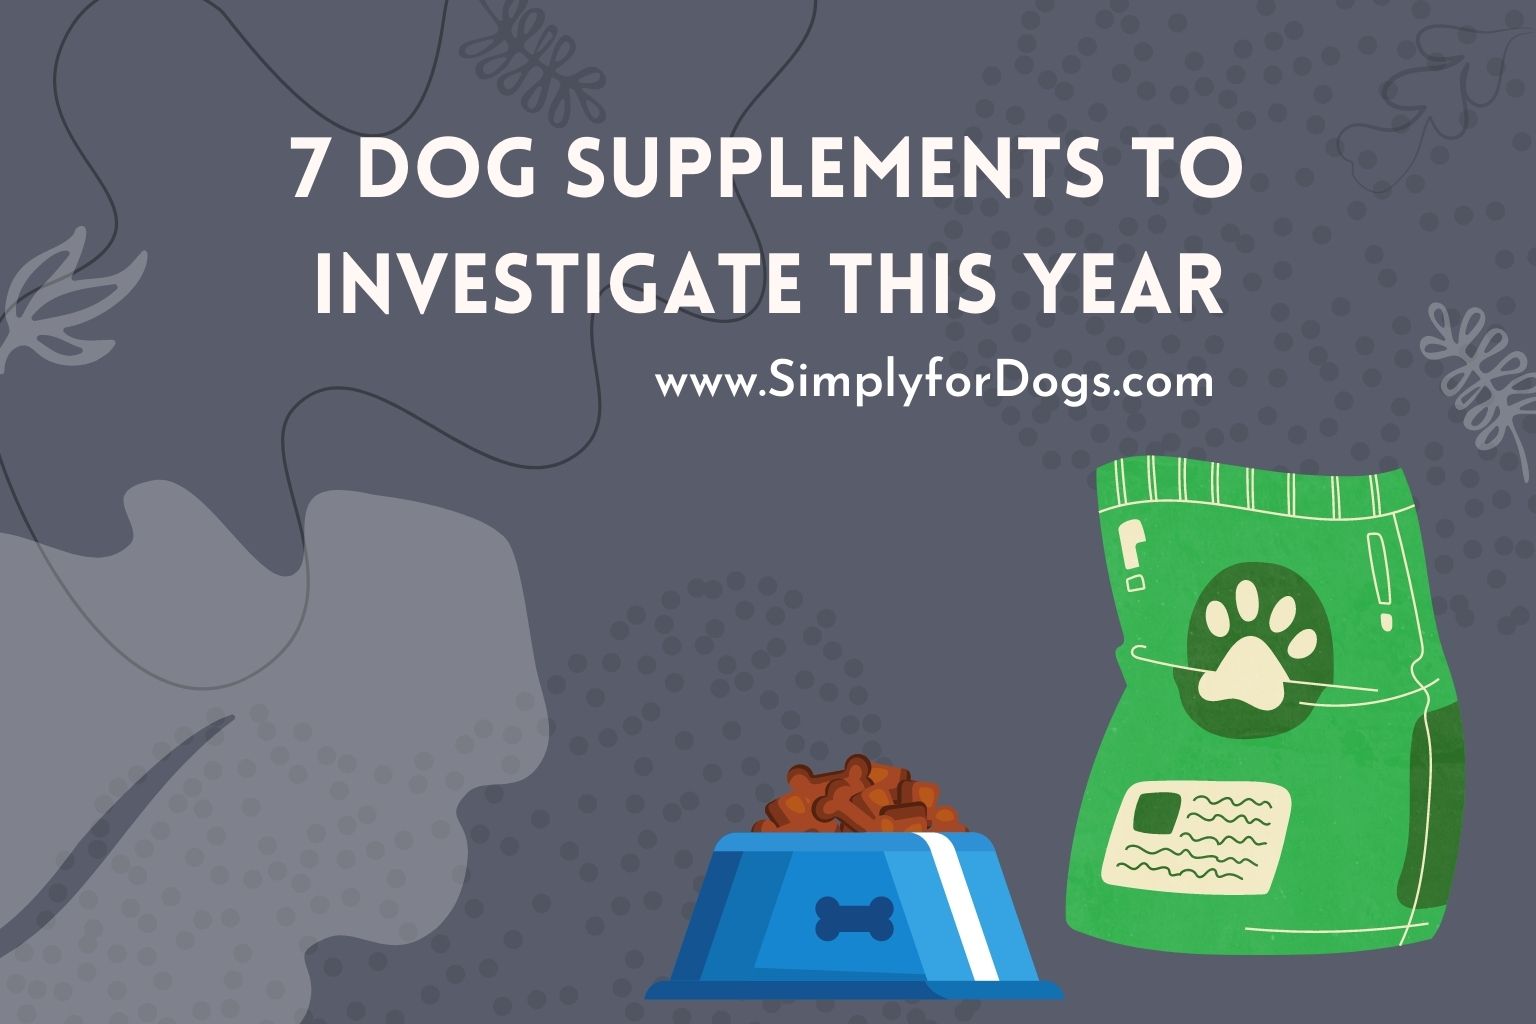 7 Dog Supplements to Investigate This Year